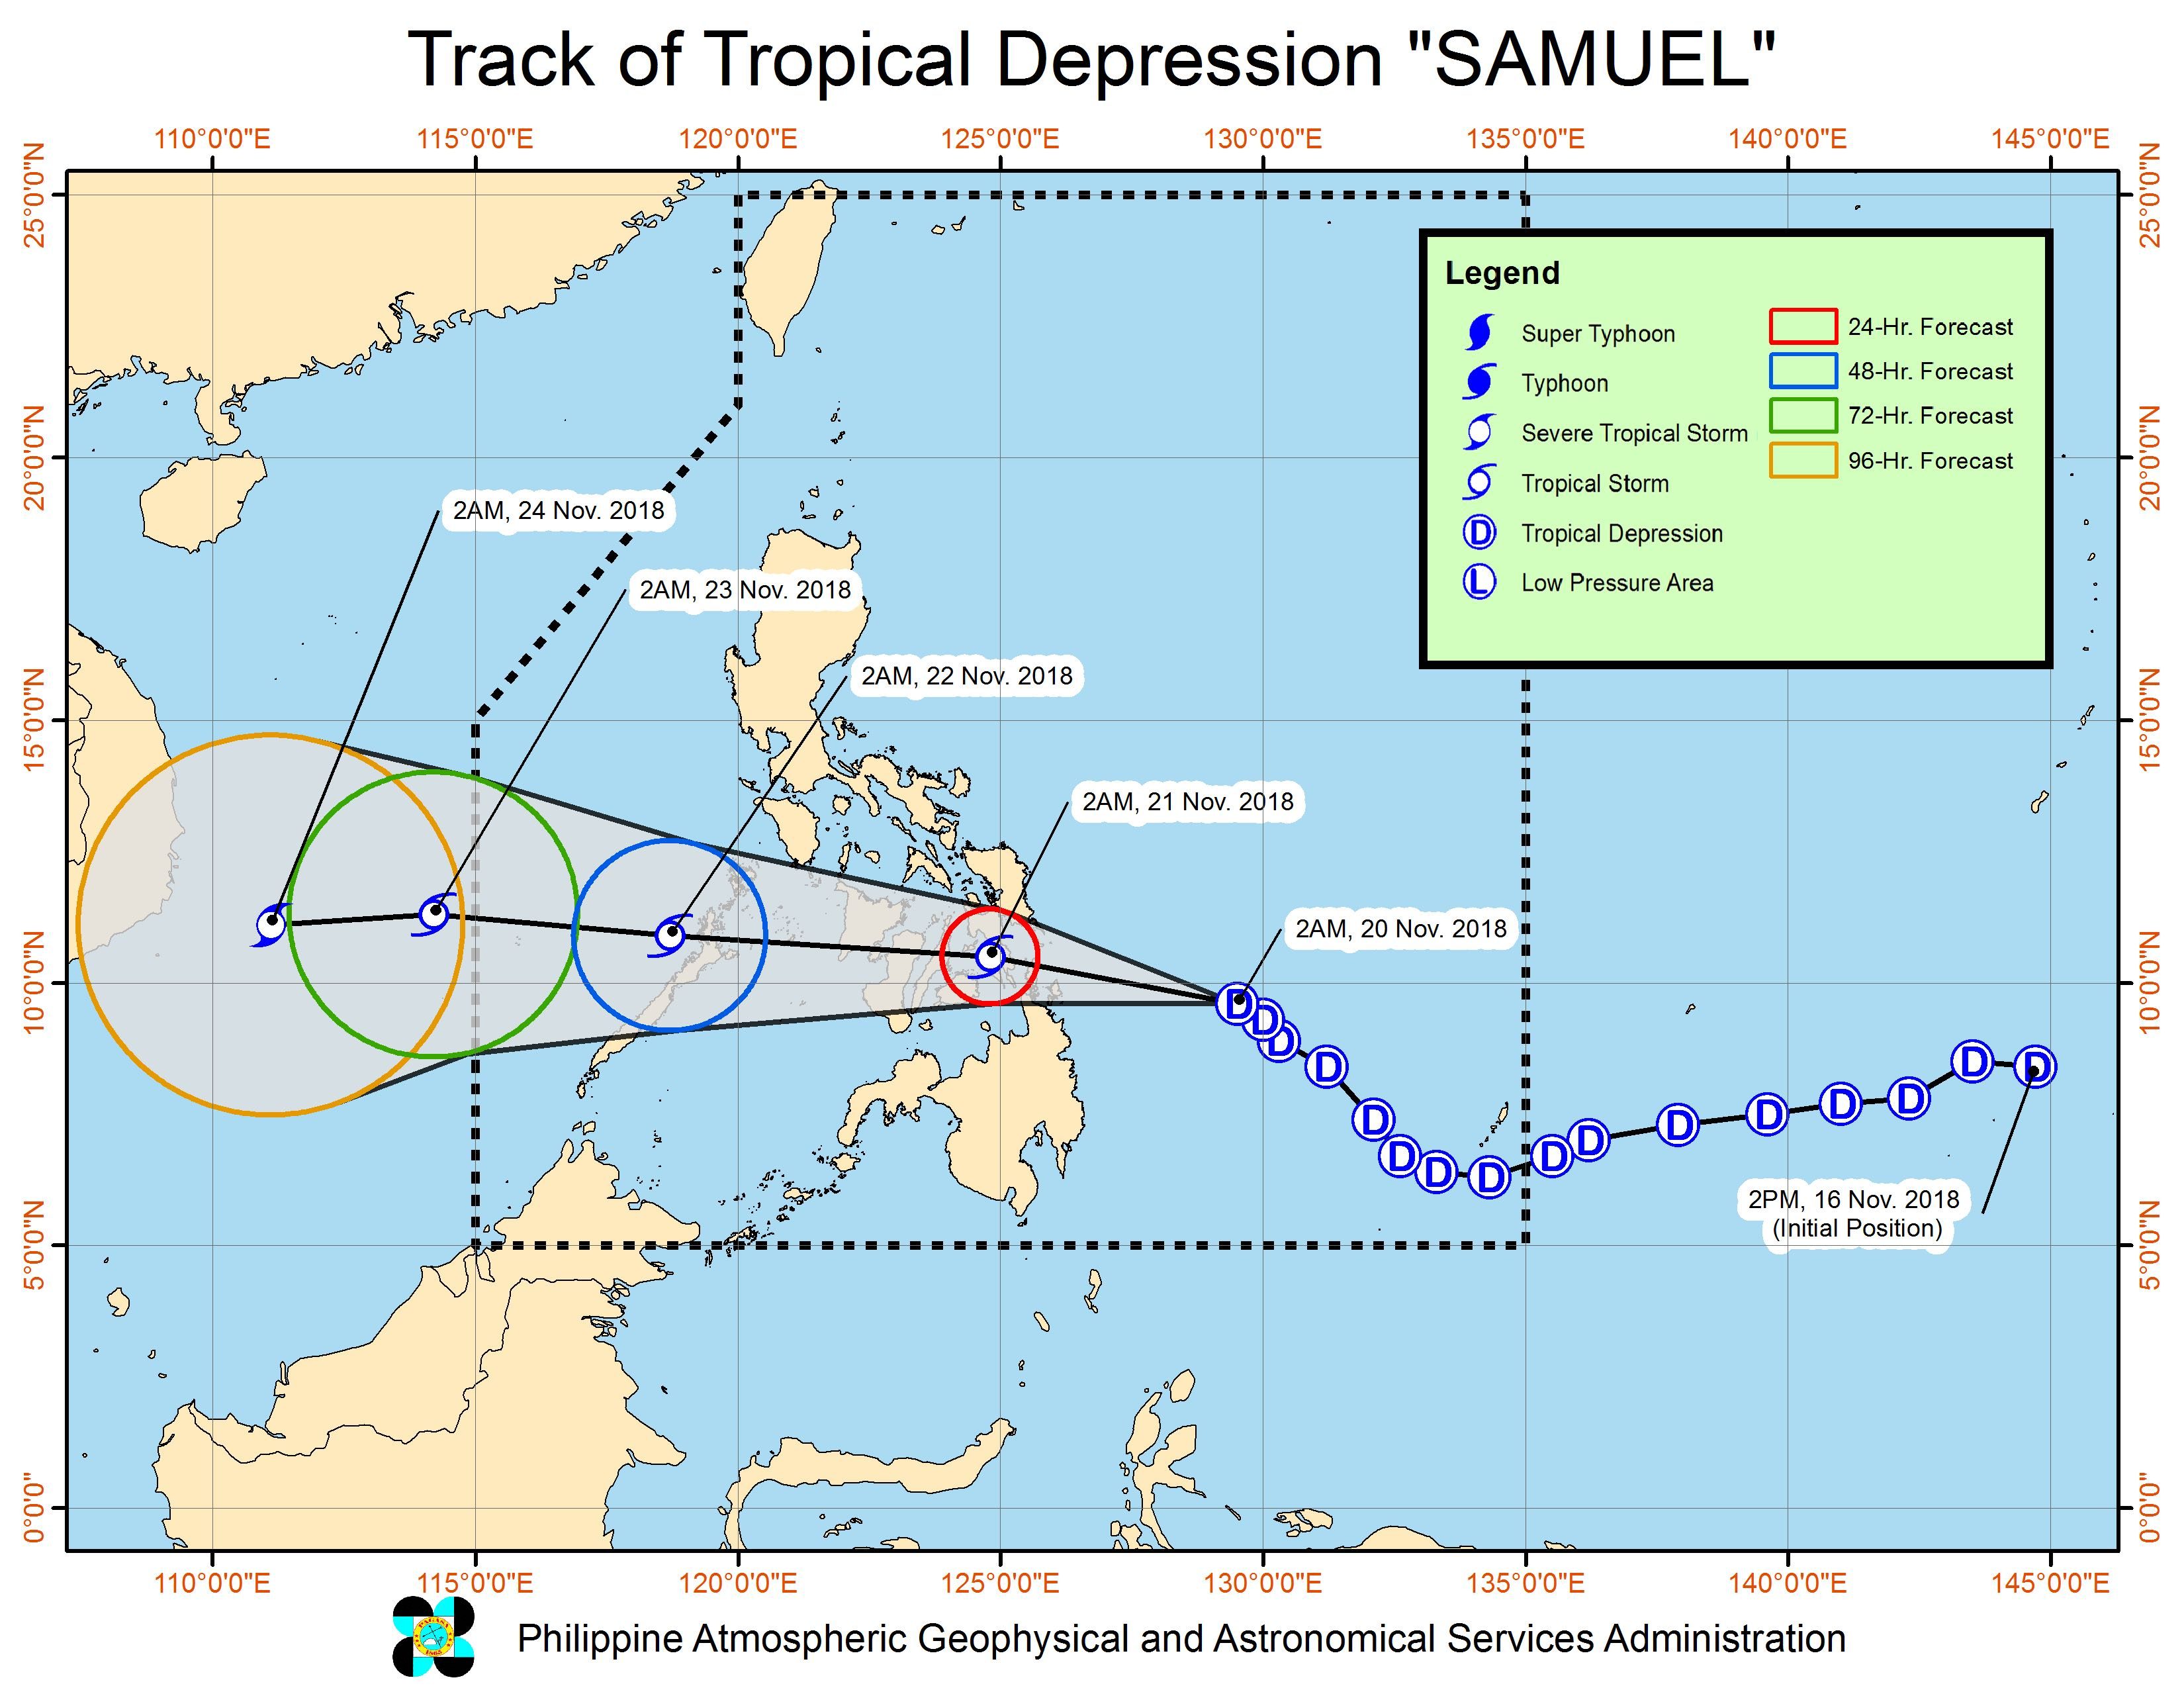 Forecast track of Tropical Depression Samuel as of November 20, 2018, 5 am. Image from PAGASA 